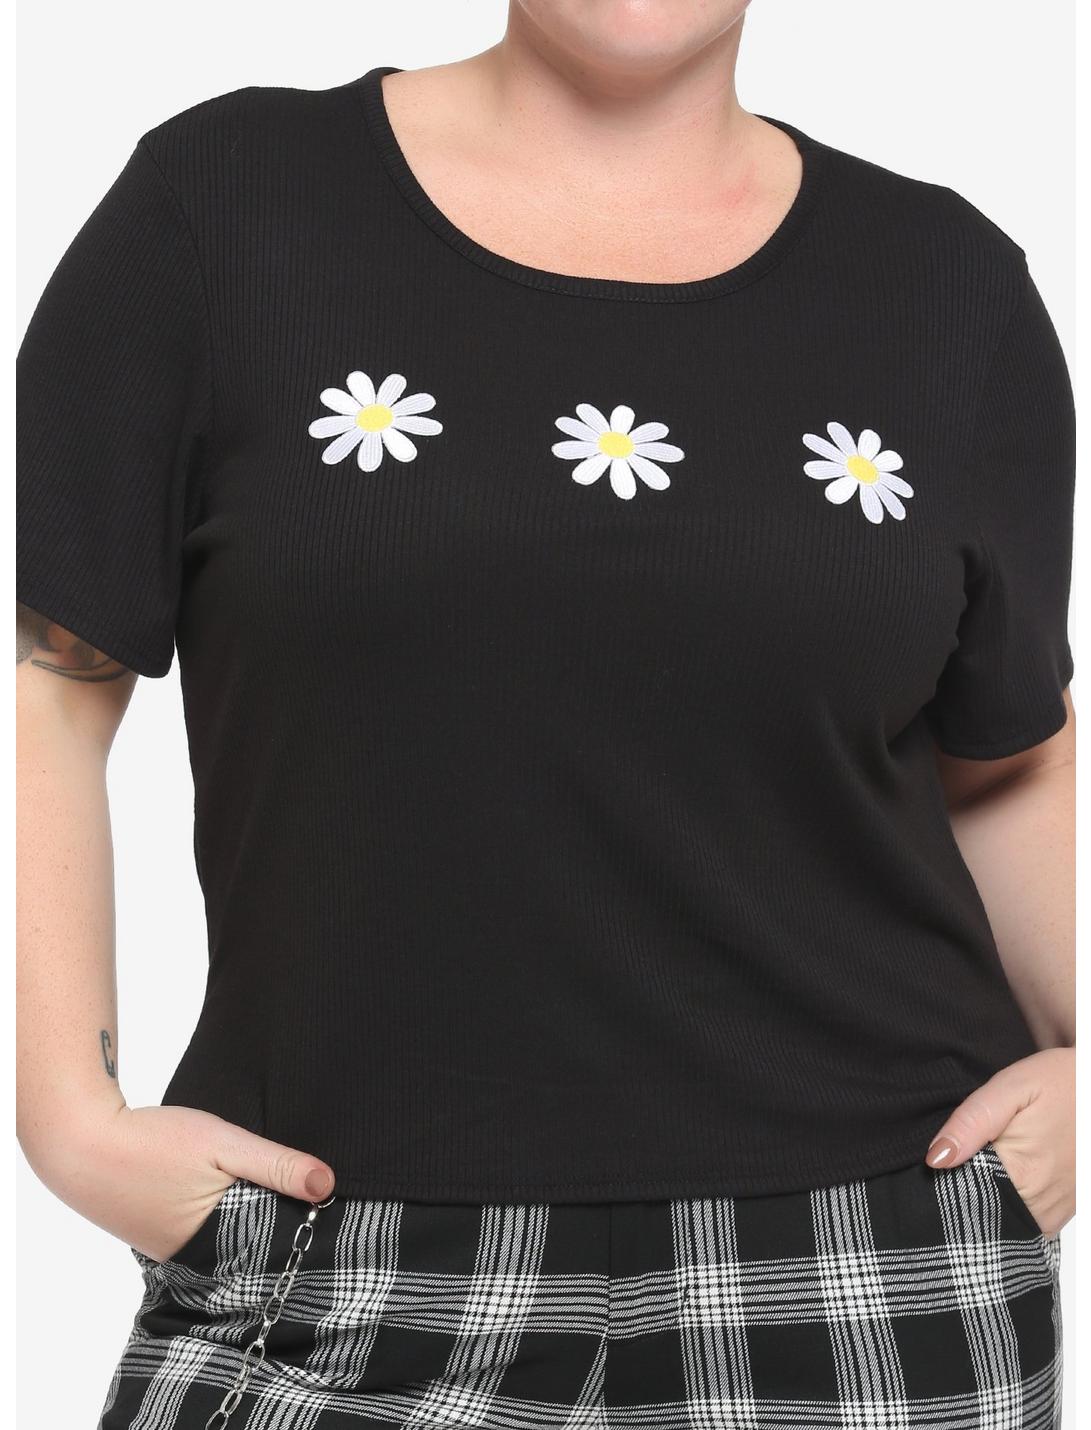 Embroidered Daisy Girls Crop Baby T-Shirt Plus Size, BLACK, hi-res